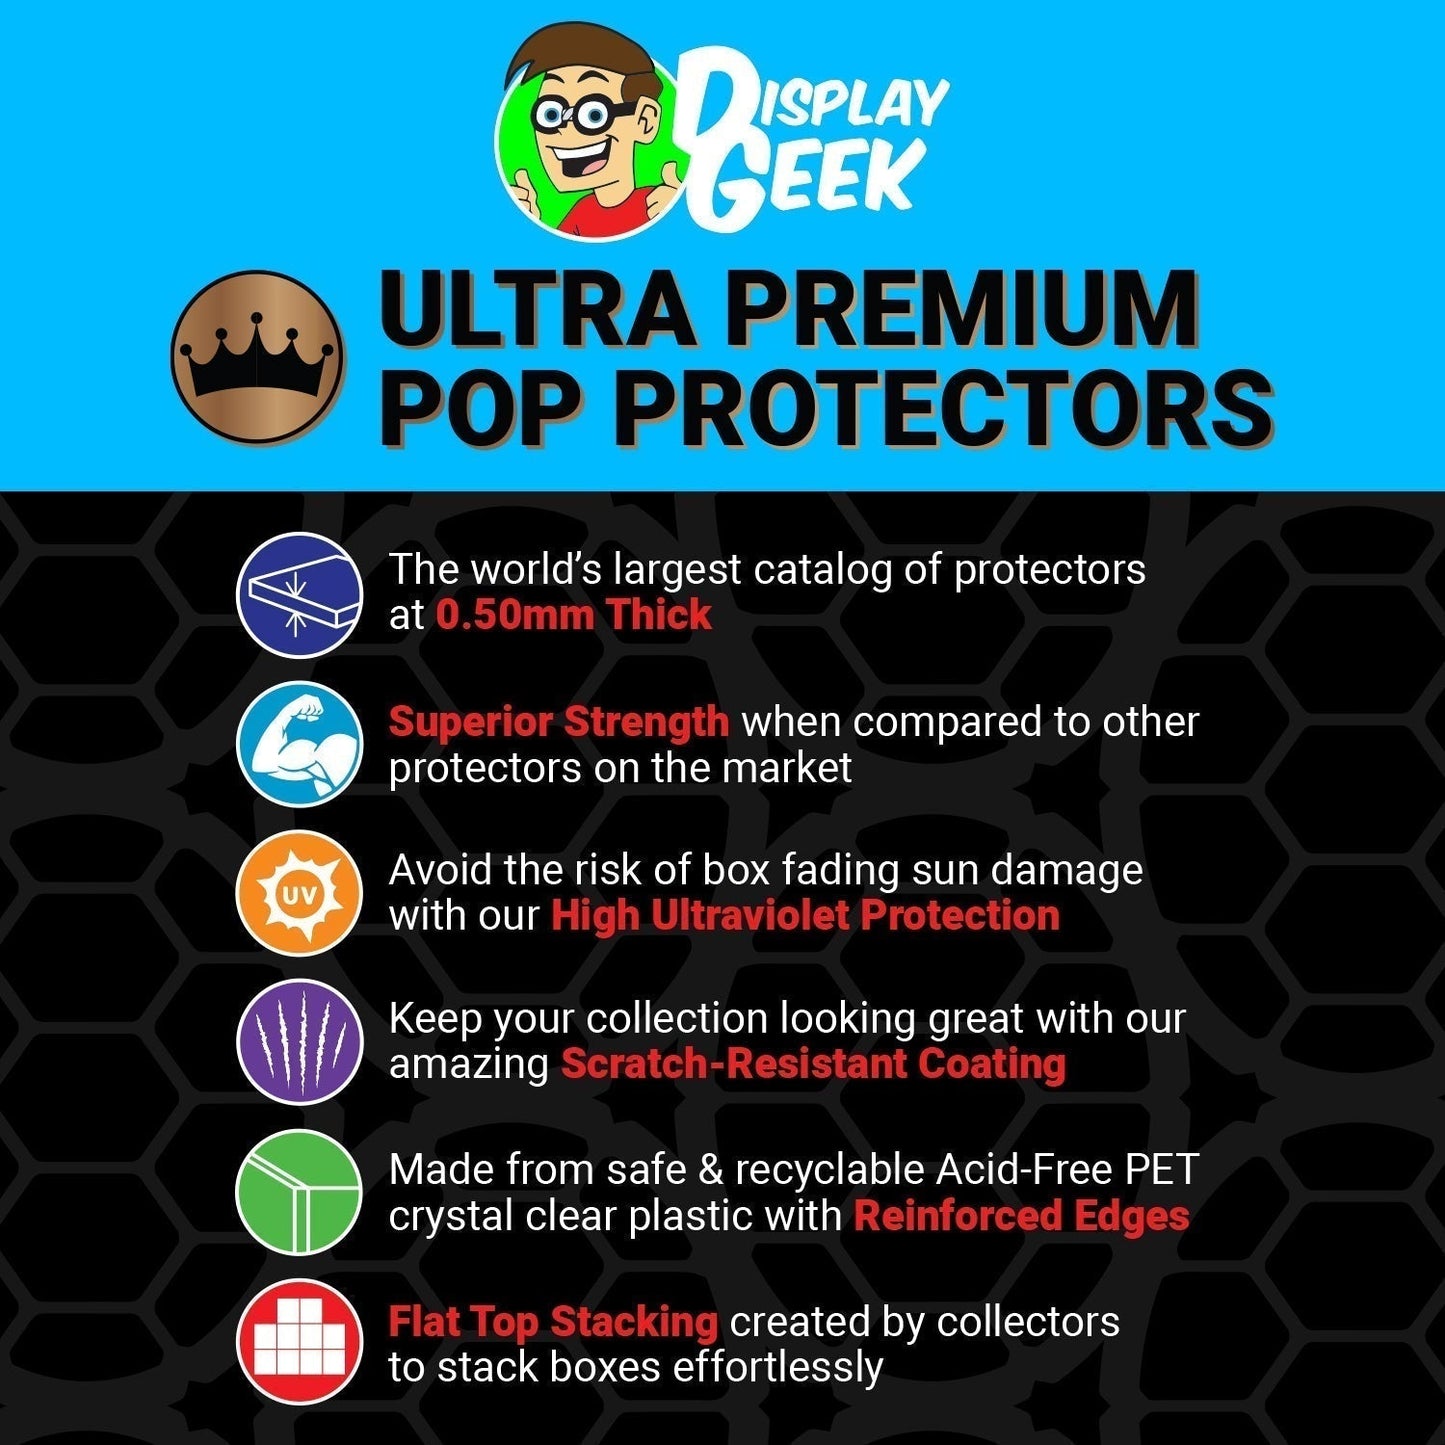 Pop Protector for 6 inch Baymax with Butterfly Chase Diamond #1233 Super Size Funko Pop - PPG Pop Protector Guide Search Created by Display Geek